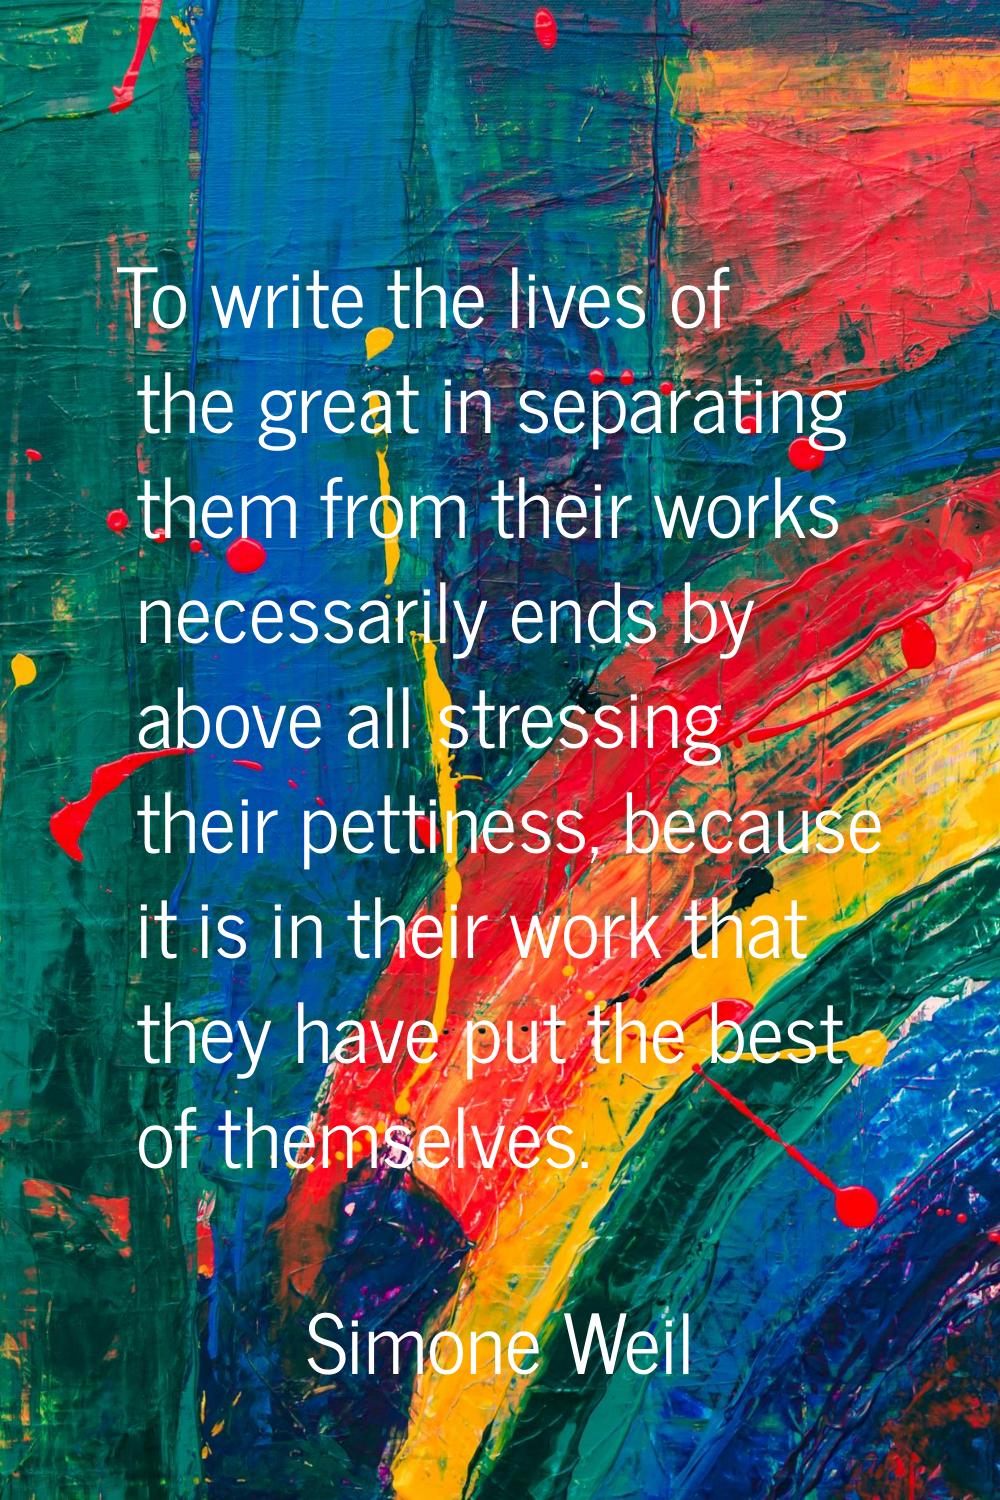 To write the lives of the great in separating them from their works necessarily ends by above all s